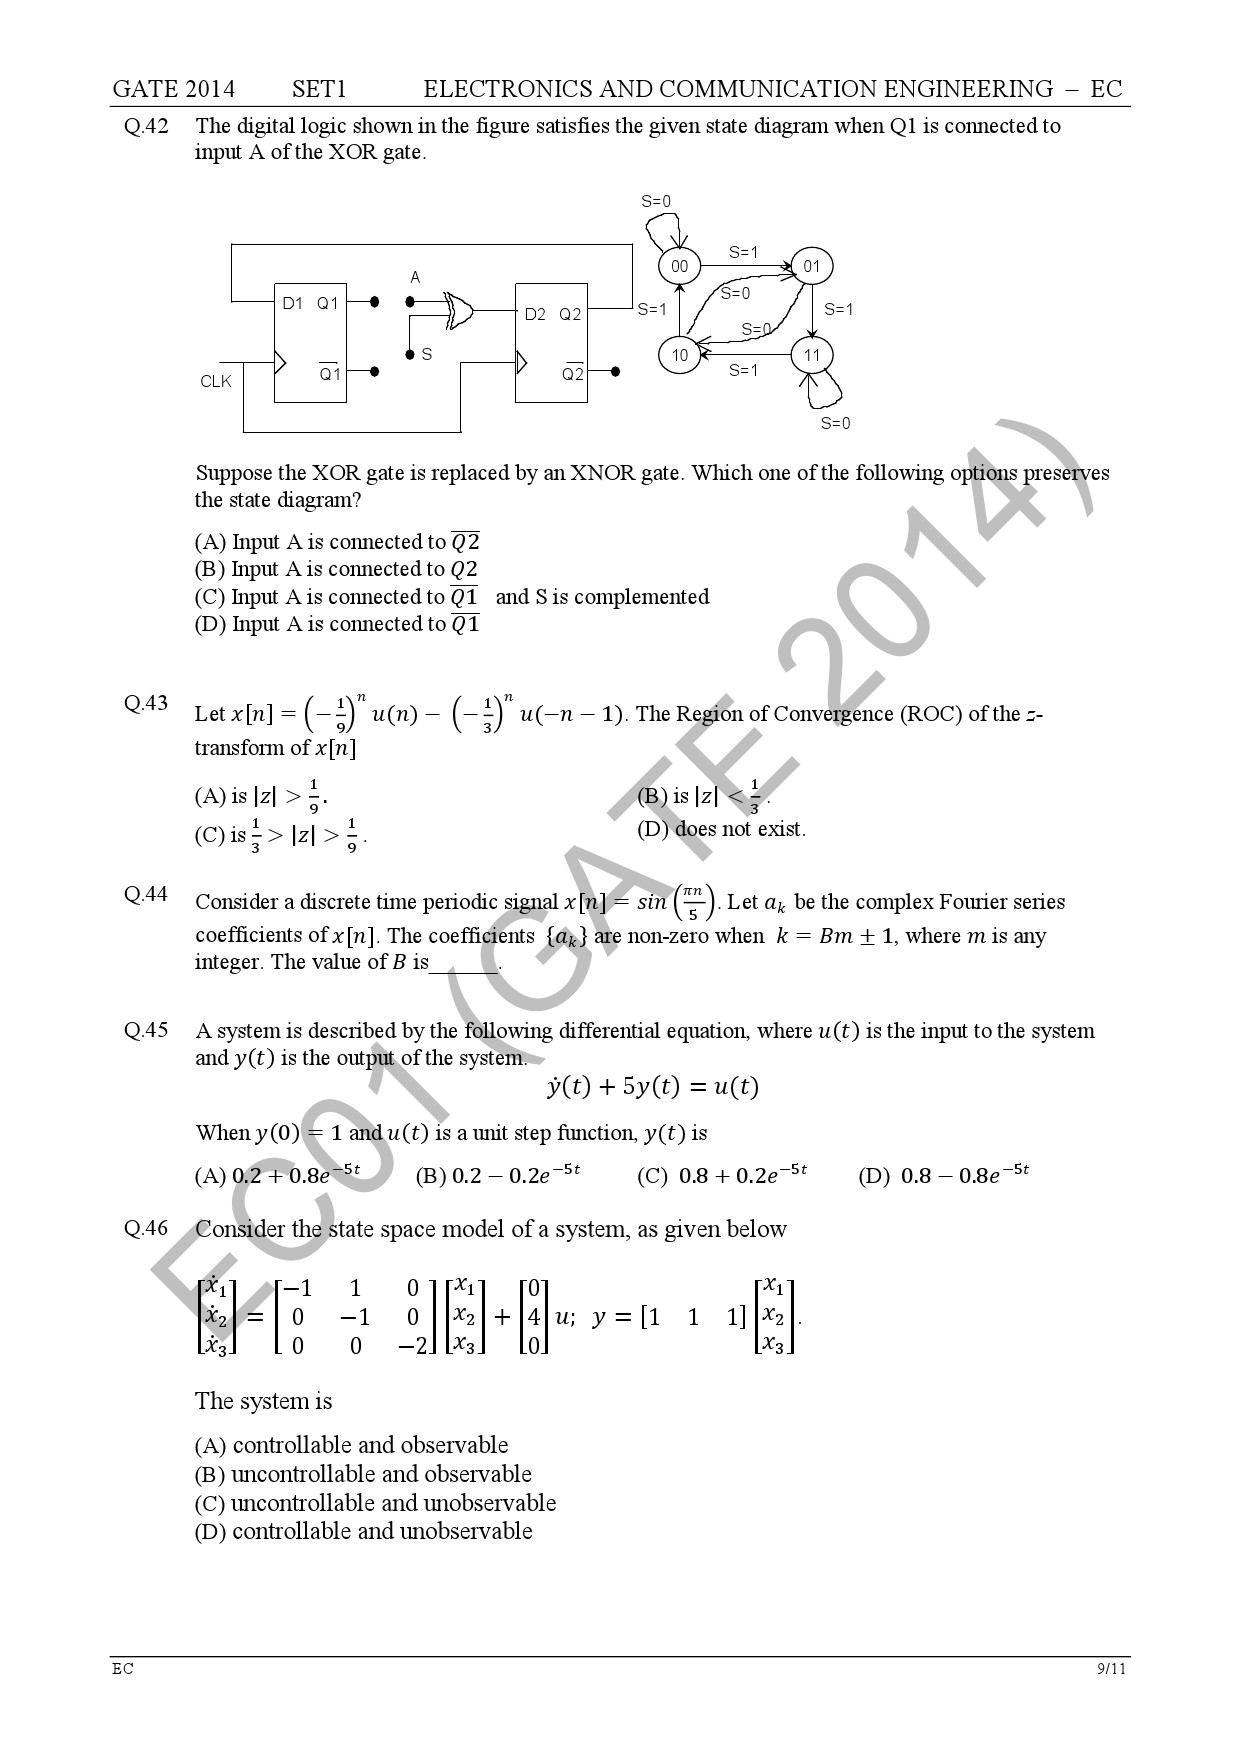 GATE Exam Question Paper 2014 Electronics and Communication Engineering Set 1 15